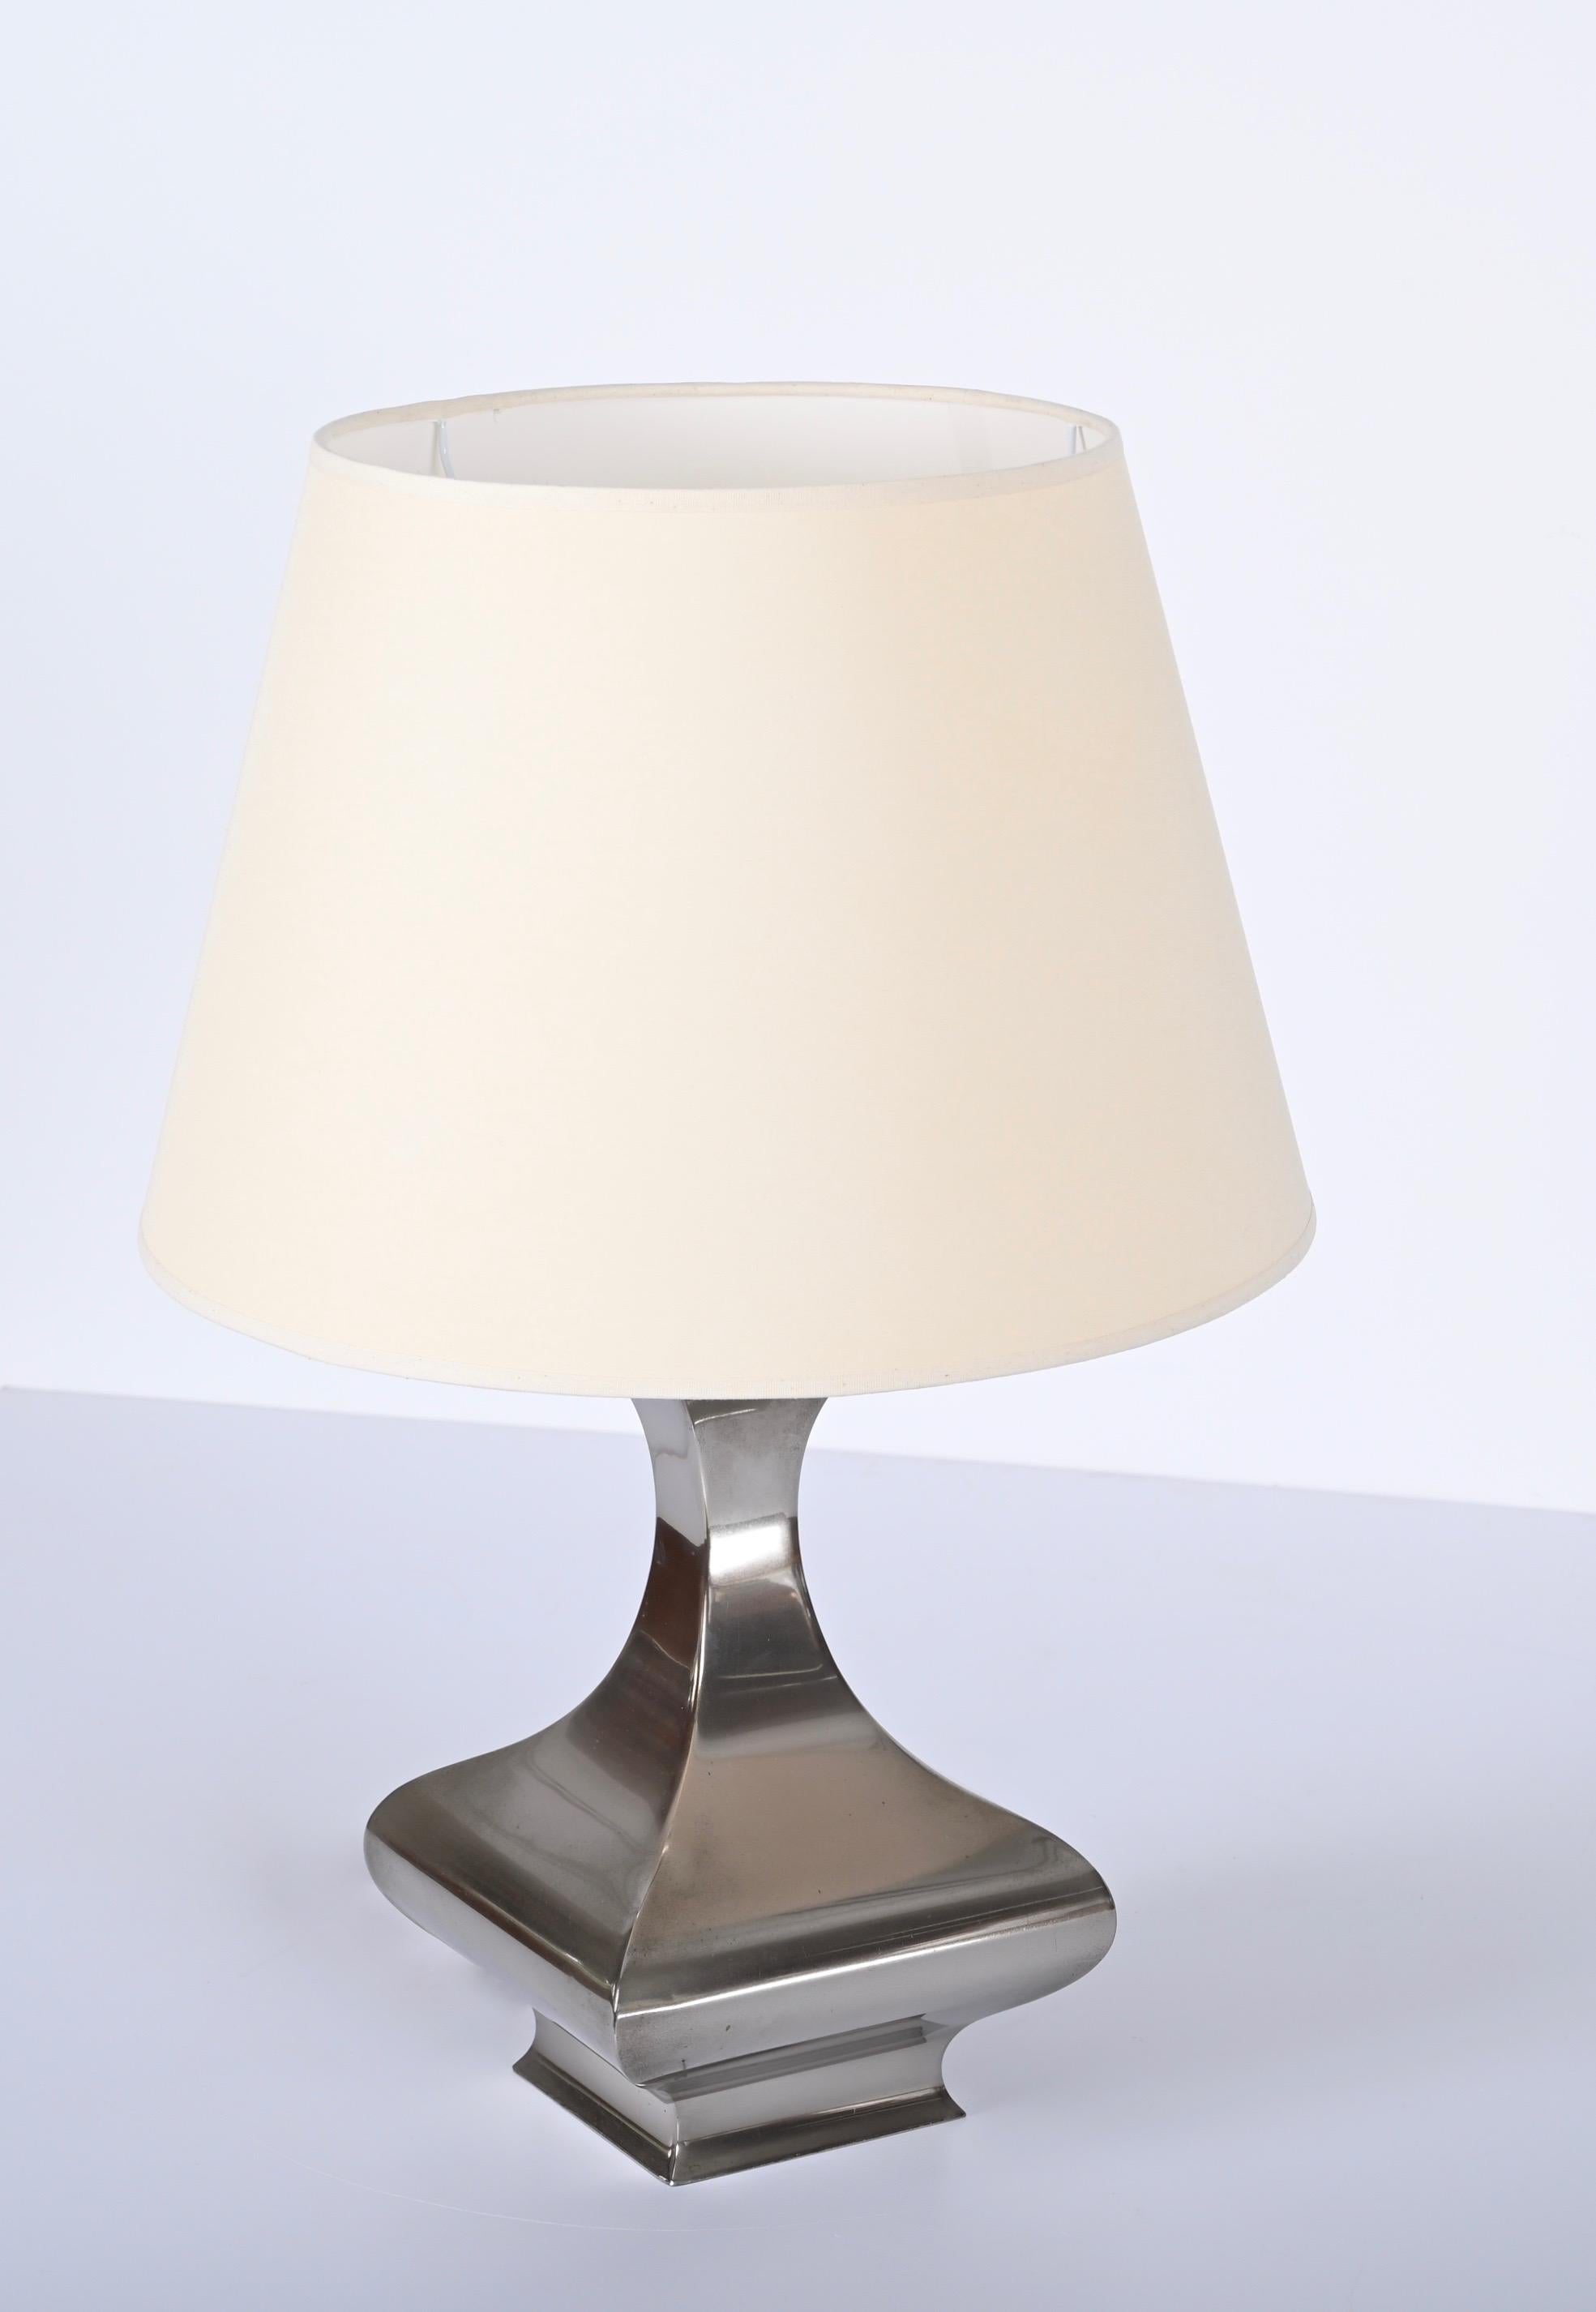 Stunning table lamp in polished stainless steel designed by Maria Pergay, France 1970s.

This rare lamp features a beautiful square curved base with a concave neck and a rounded white fabric lampshade. Any type of light bulb with an E27 screw base